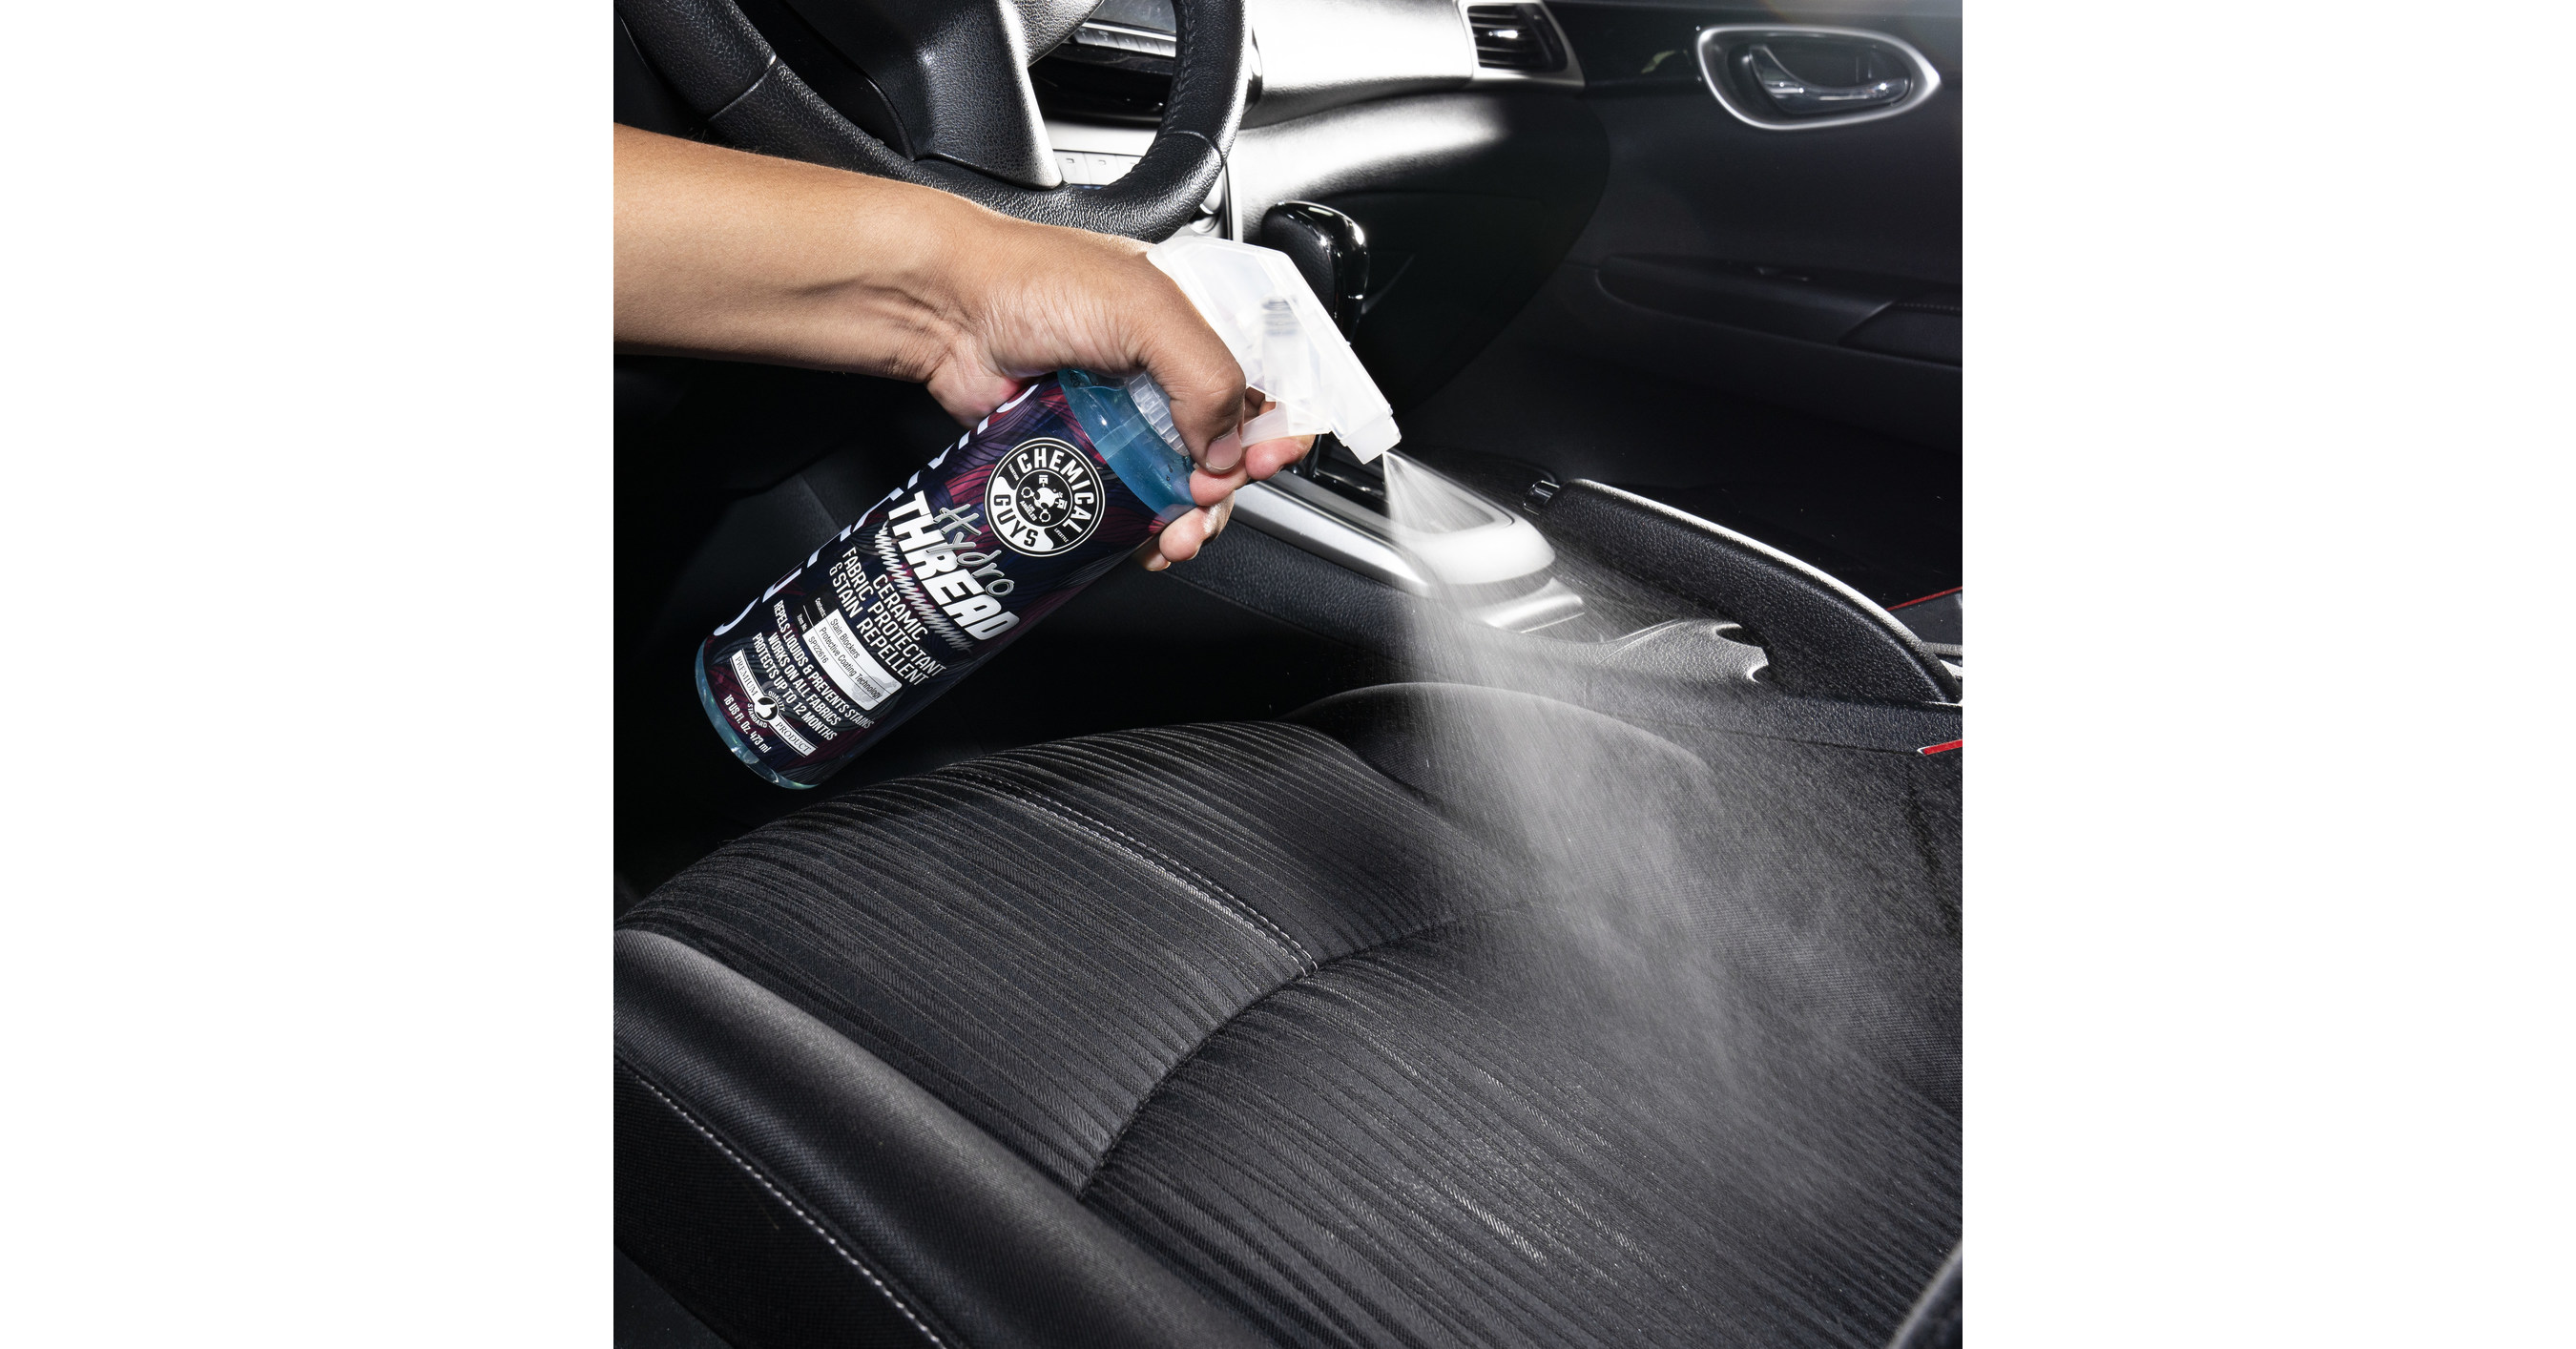 Chemical Guys Launches HydroThread Ceramic Fabric Protectant as